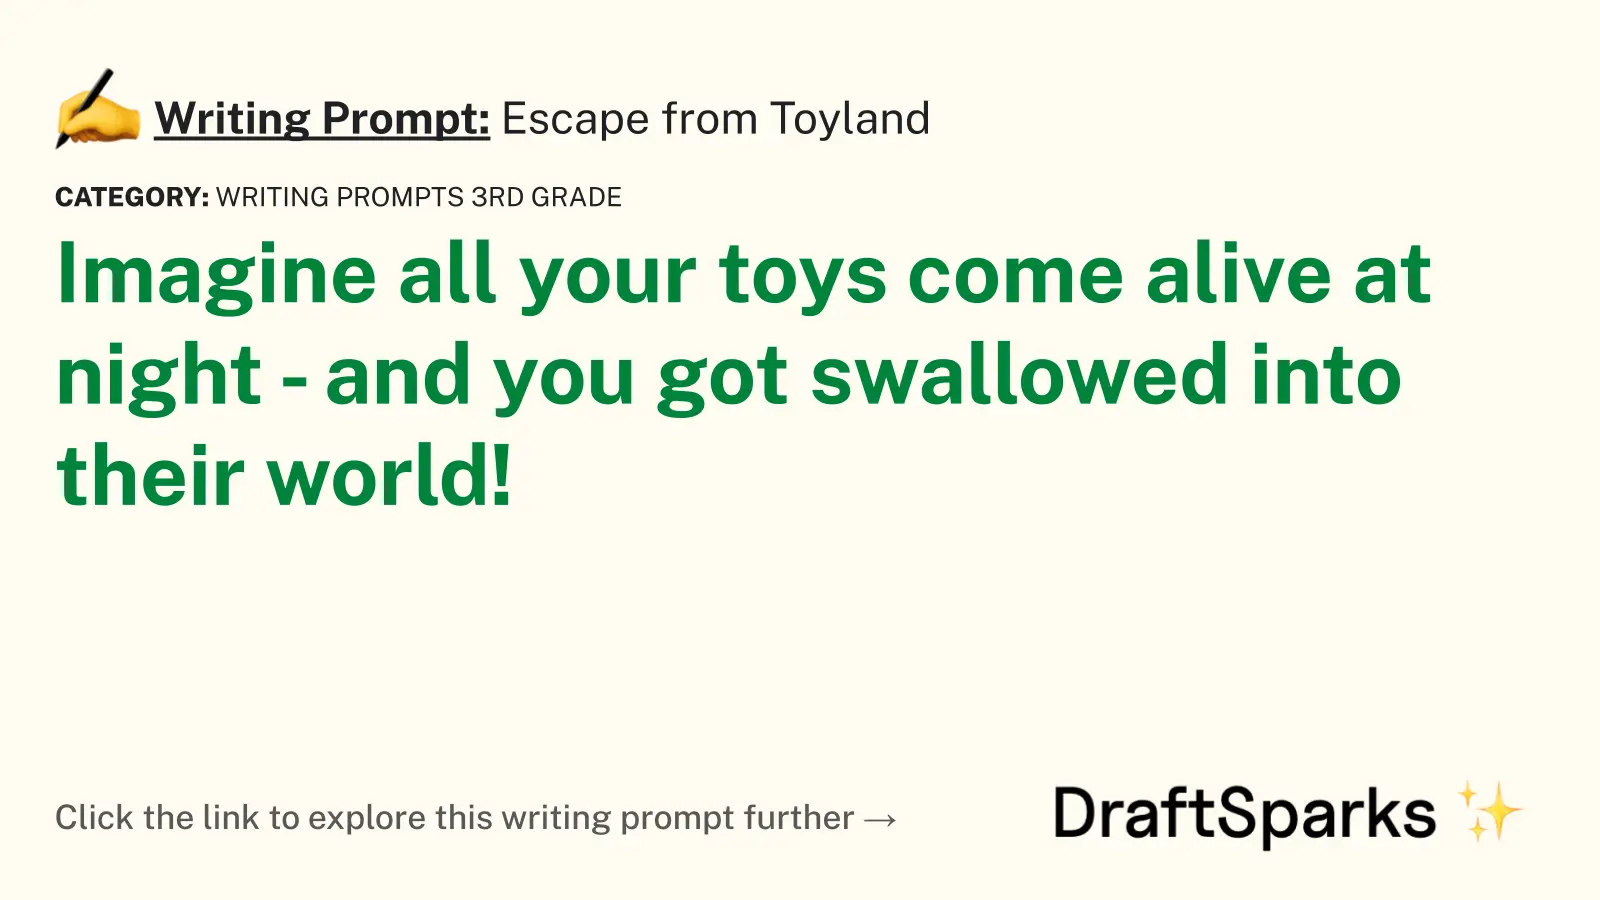 Escape from Toyland